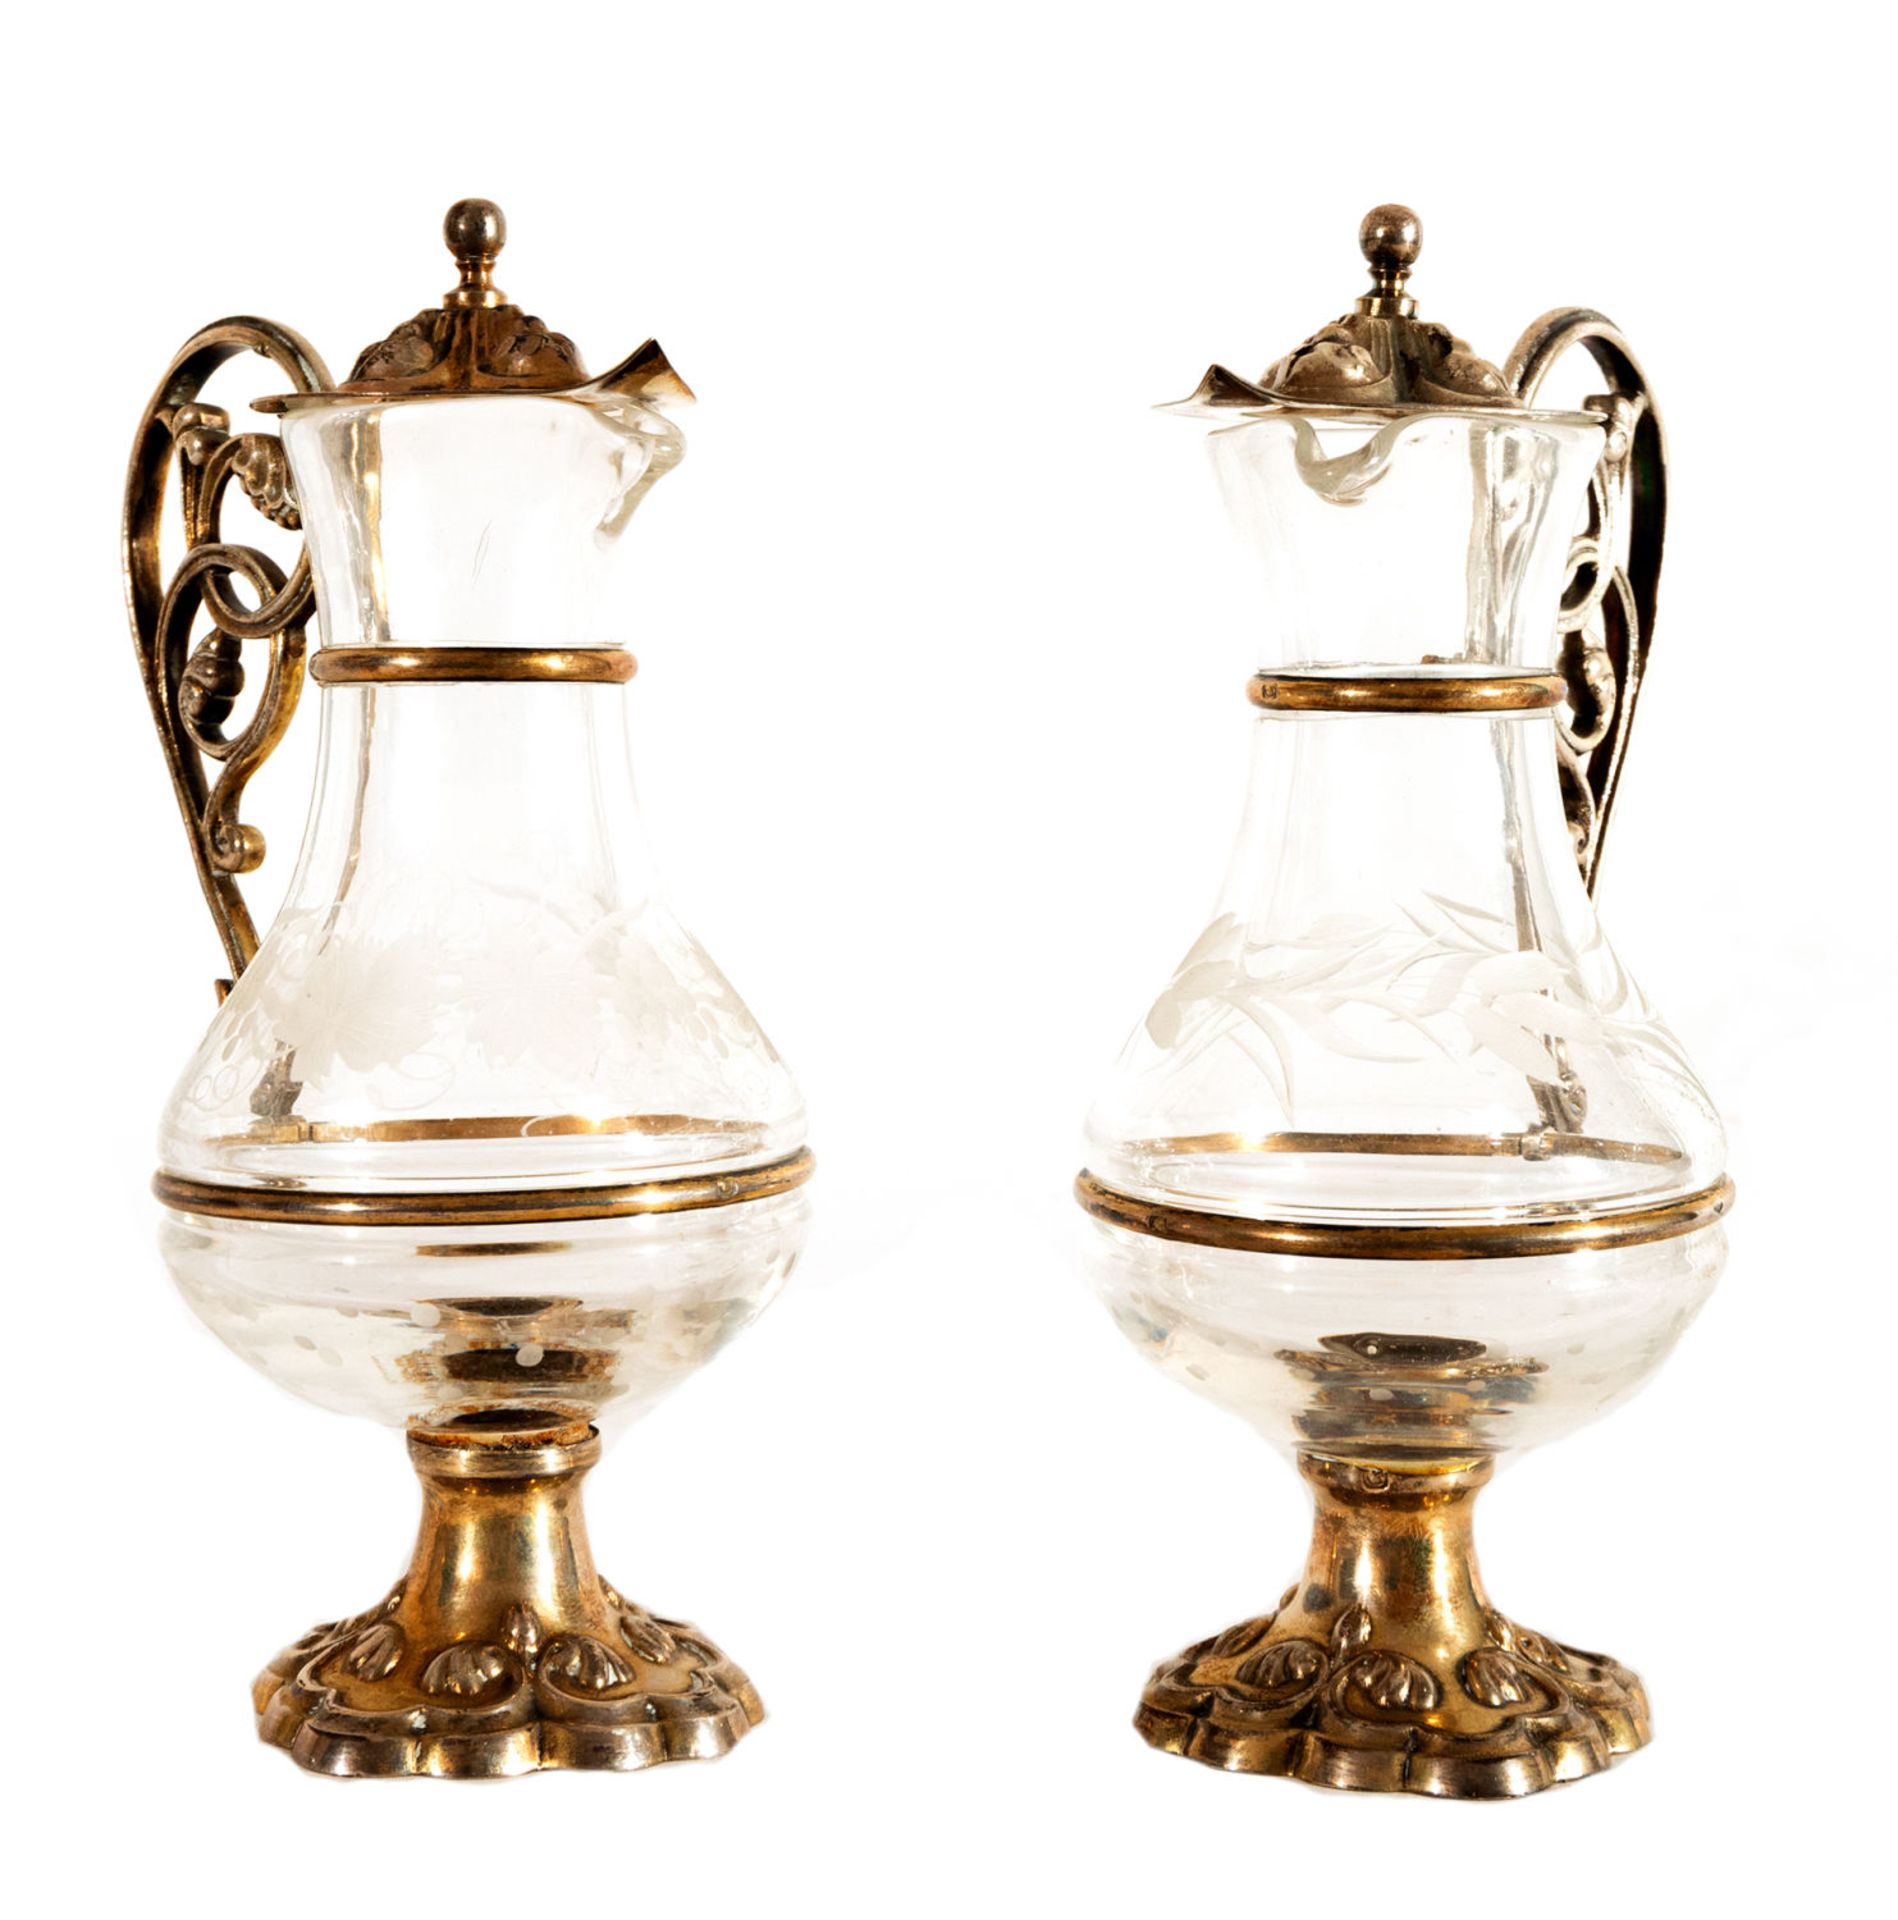 Pair of Crystal Wine and Water Jugs mounted on Sterling Silver, La Granja, 19th century